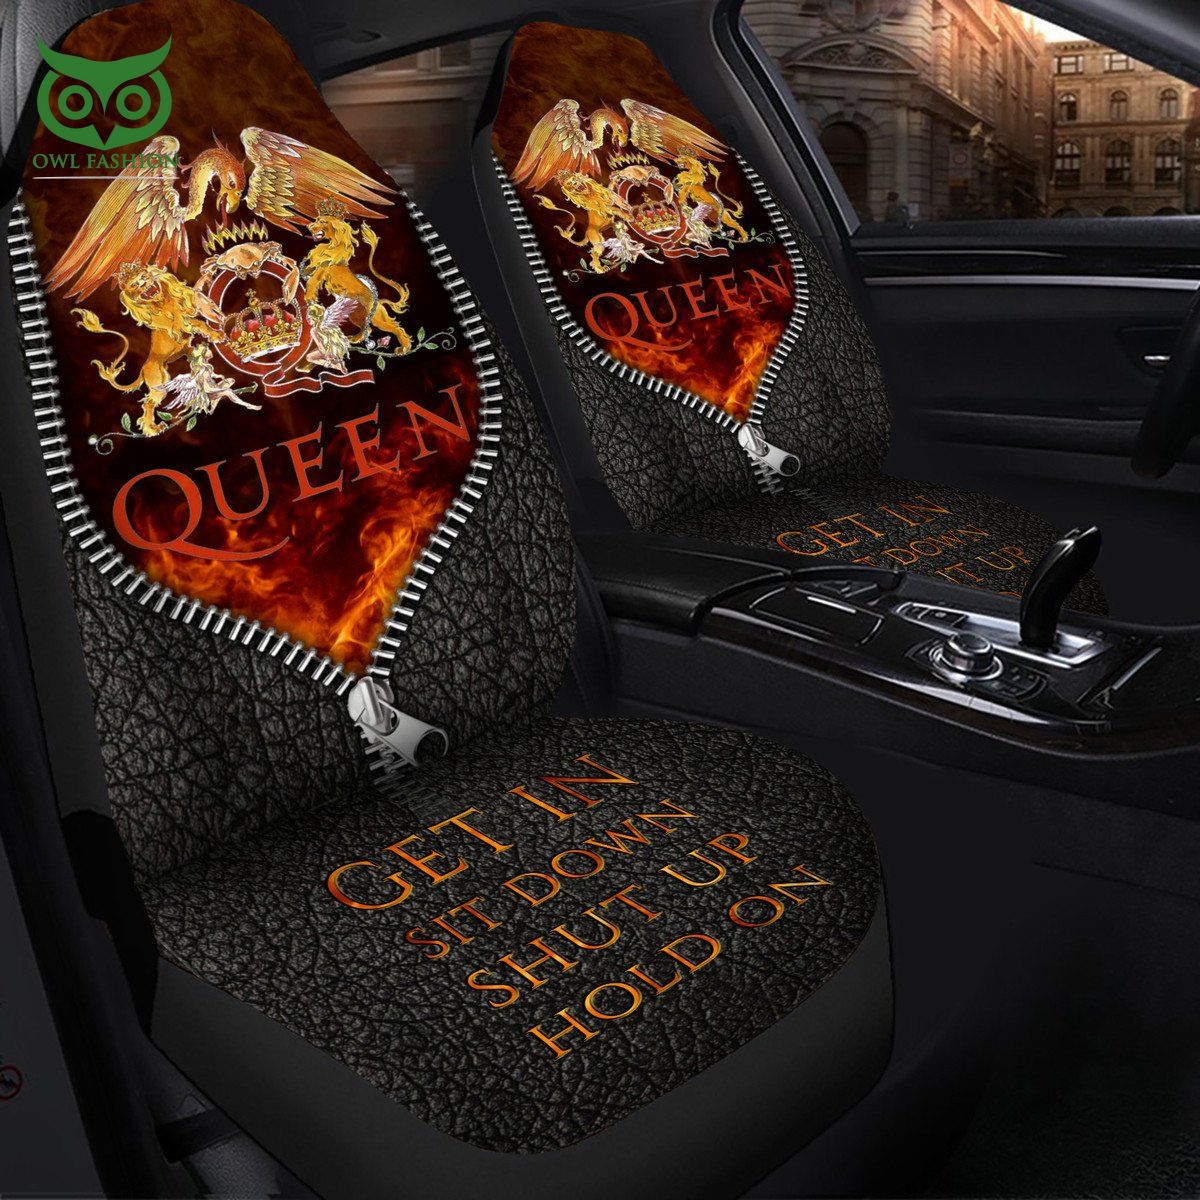 queen rock band get in shut down car seat cover 1 O9yp2.jpg